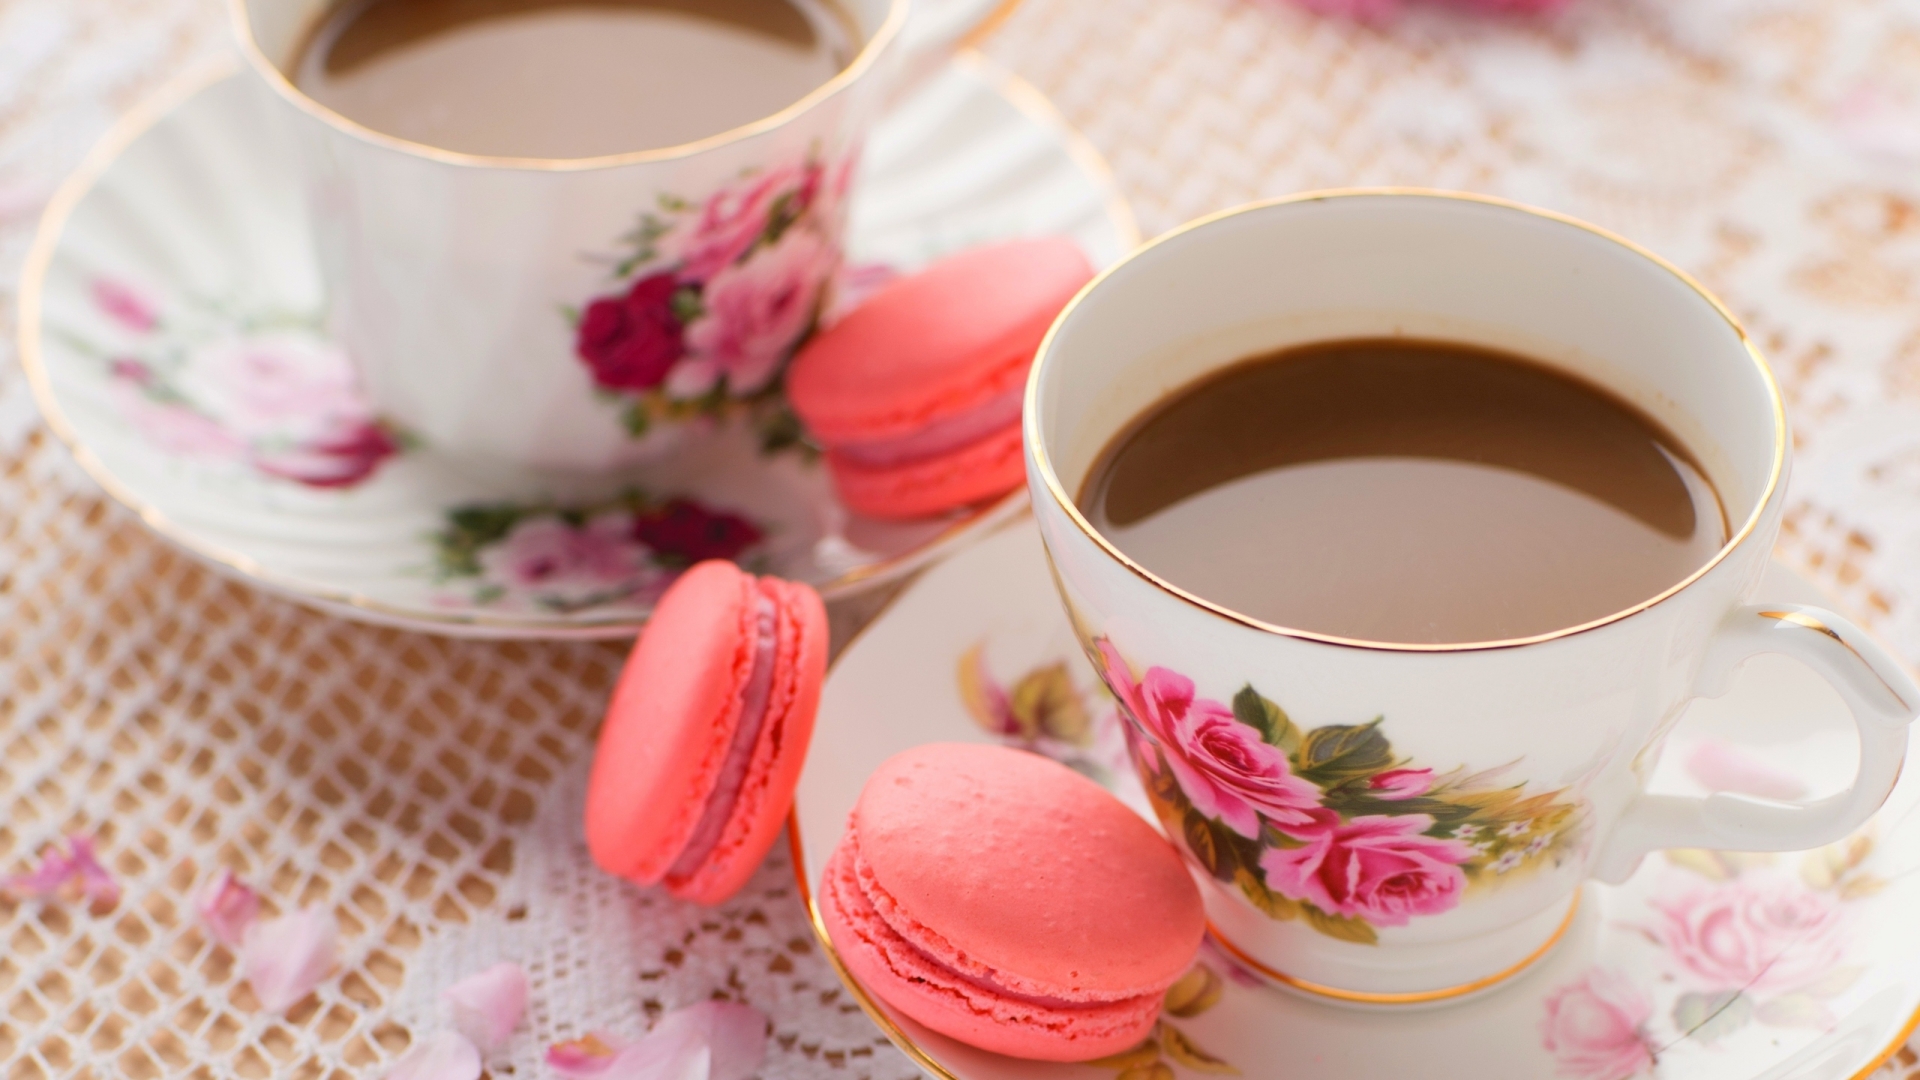 Coffee and Macaroons for 1920 x 1080 HDTV 1080p resolution